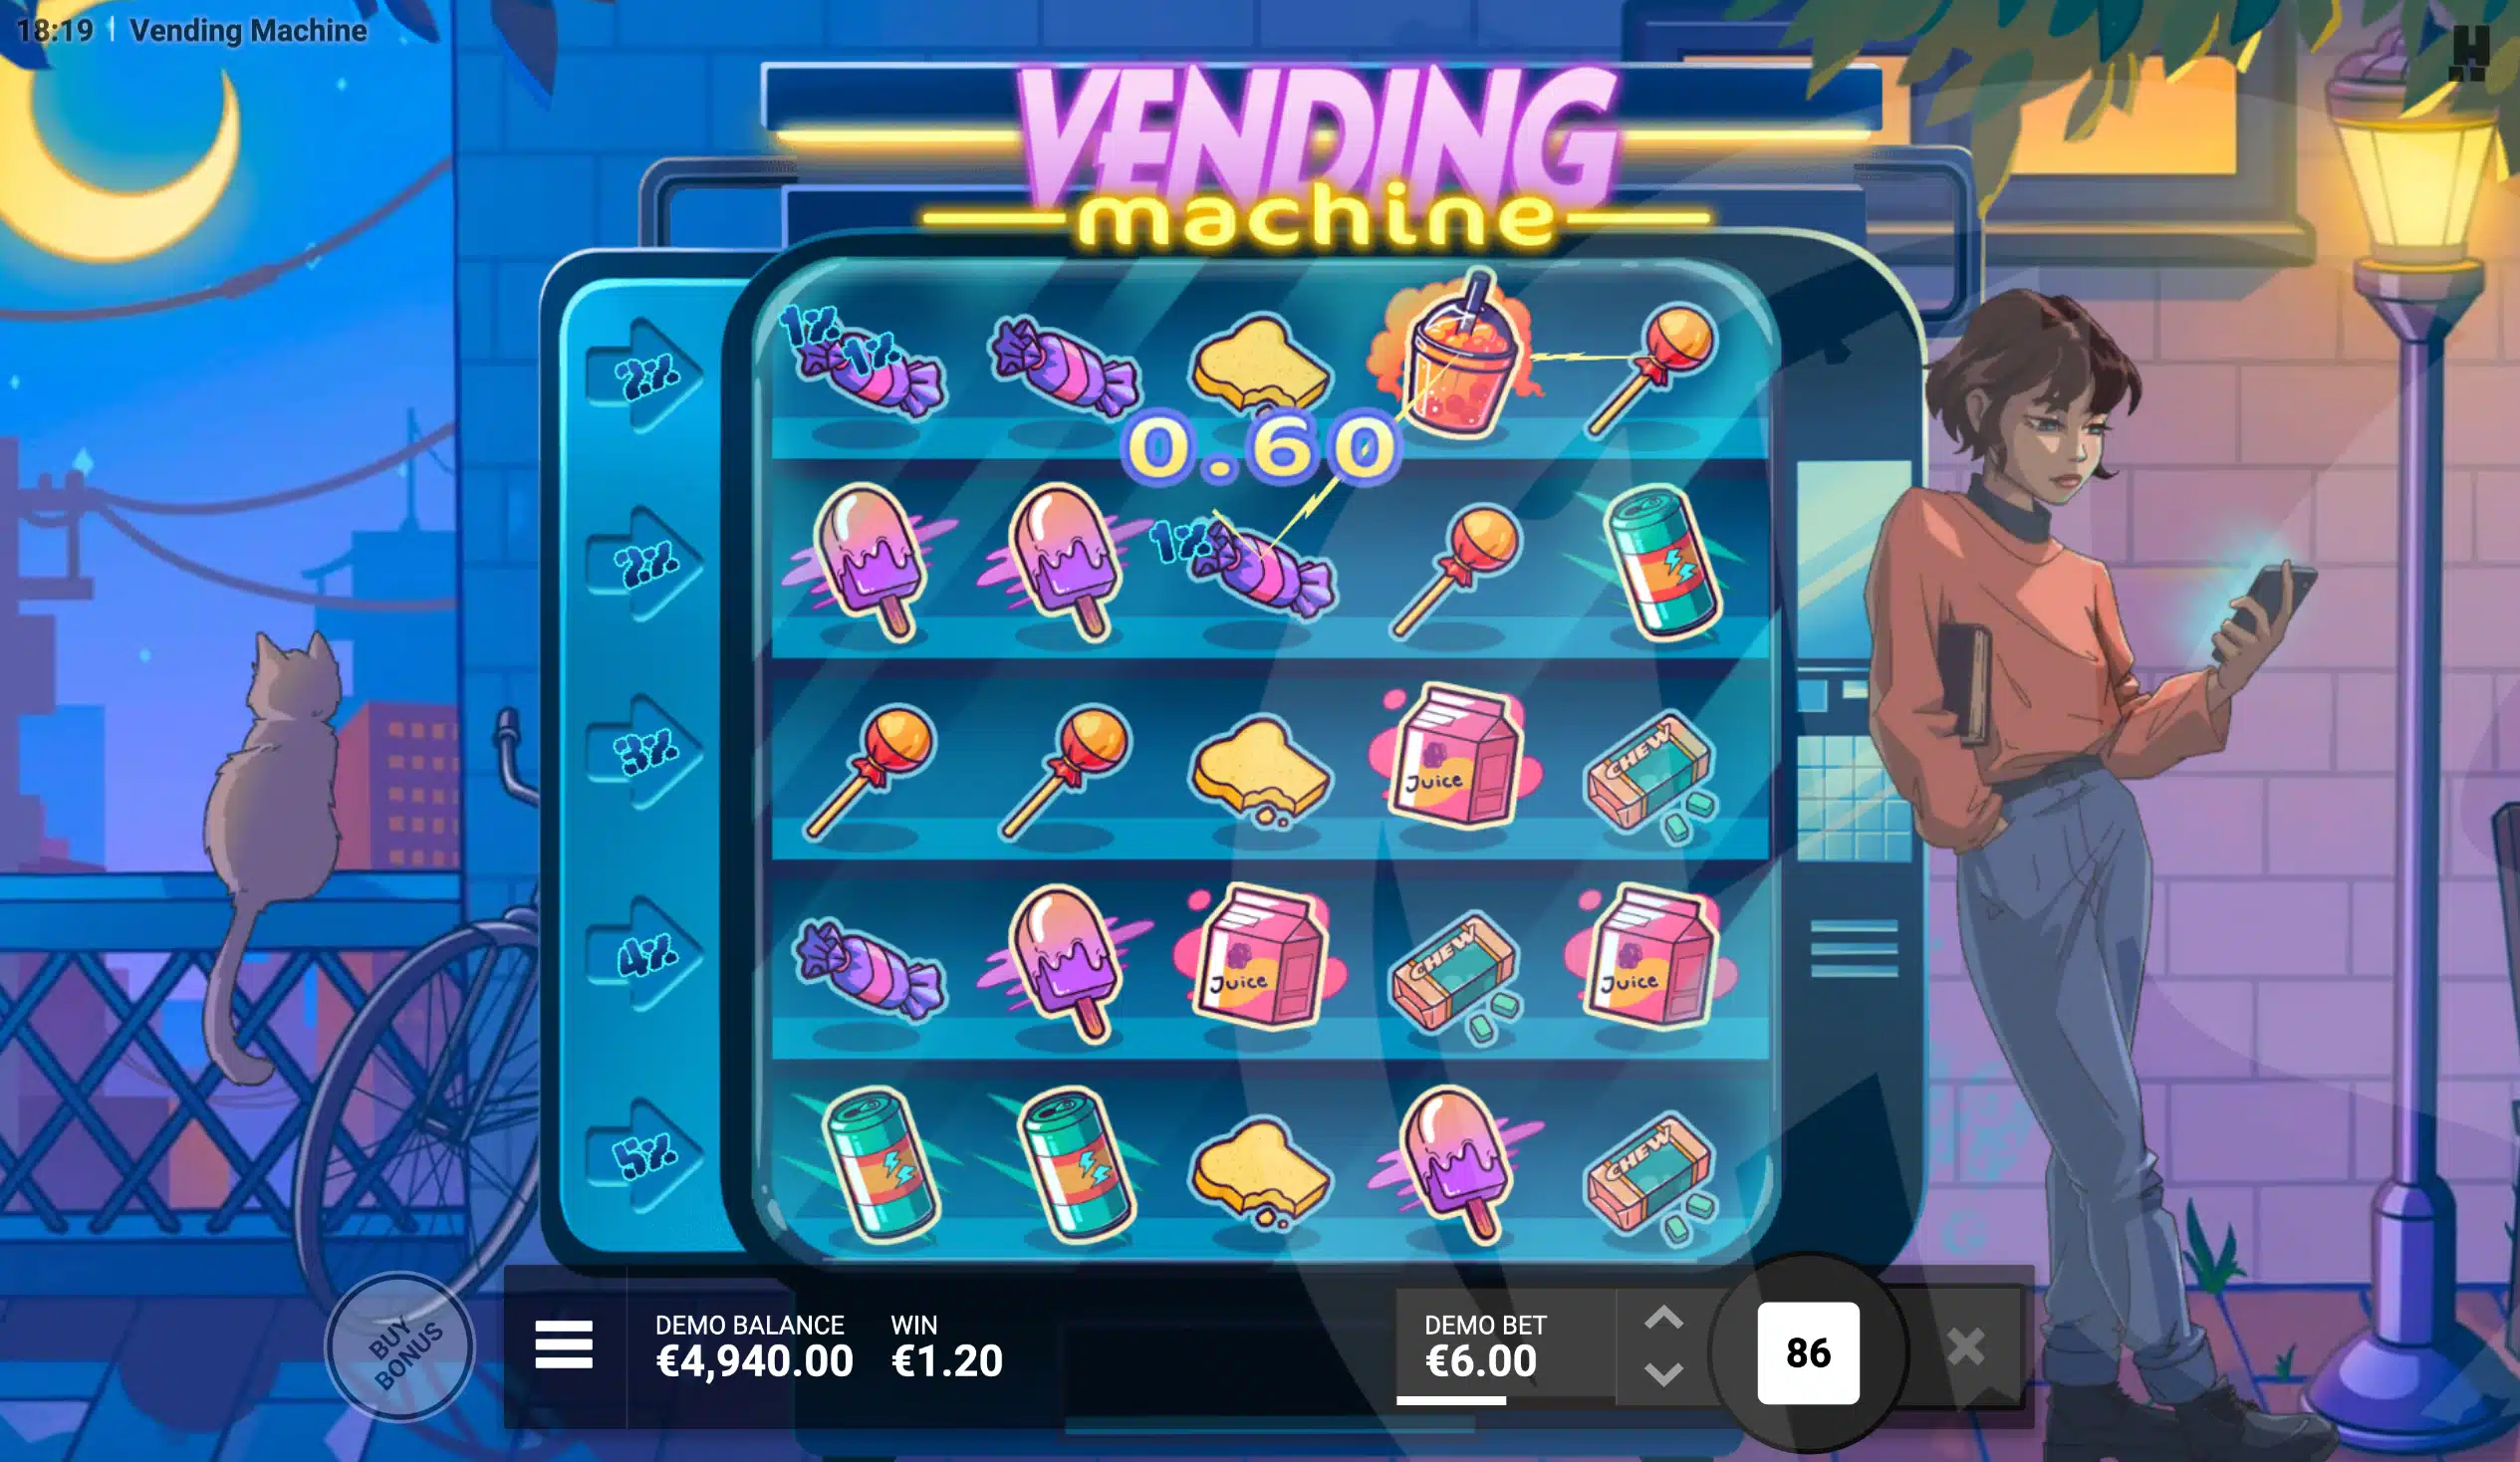 Vending Machine Offers Players 35 Fixed Win Lines